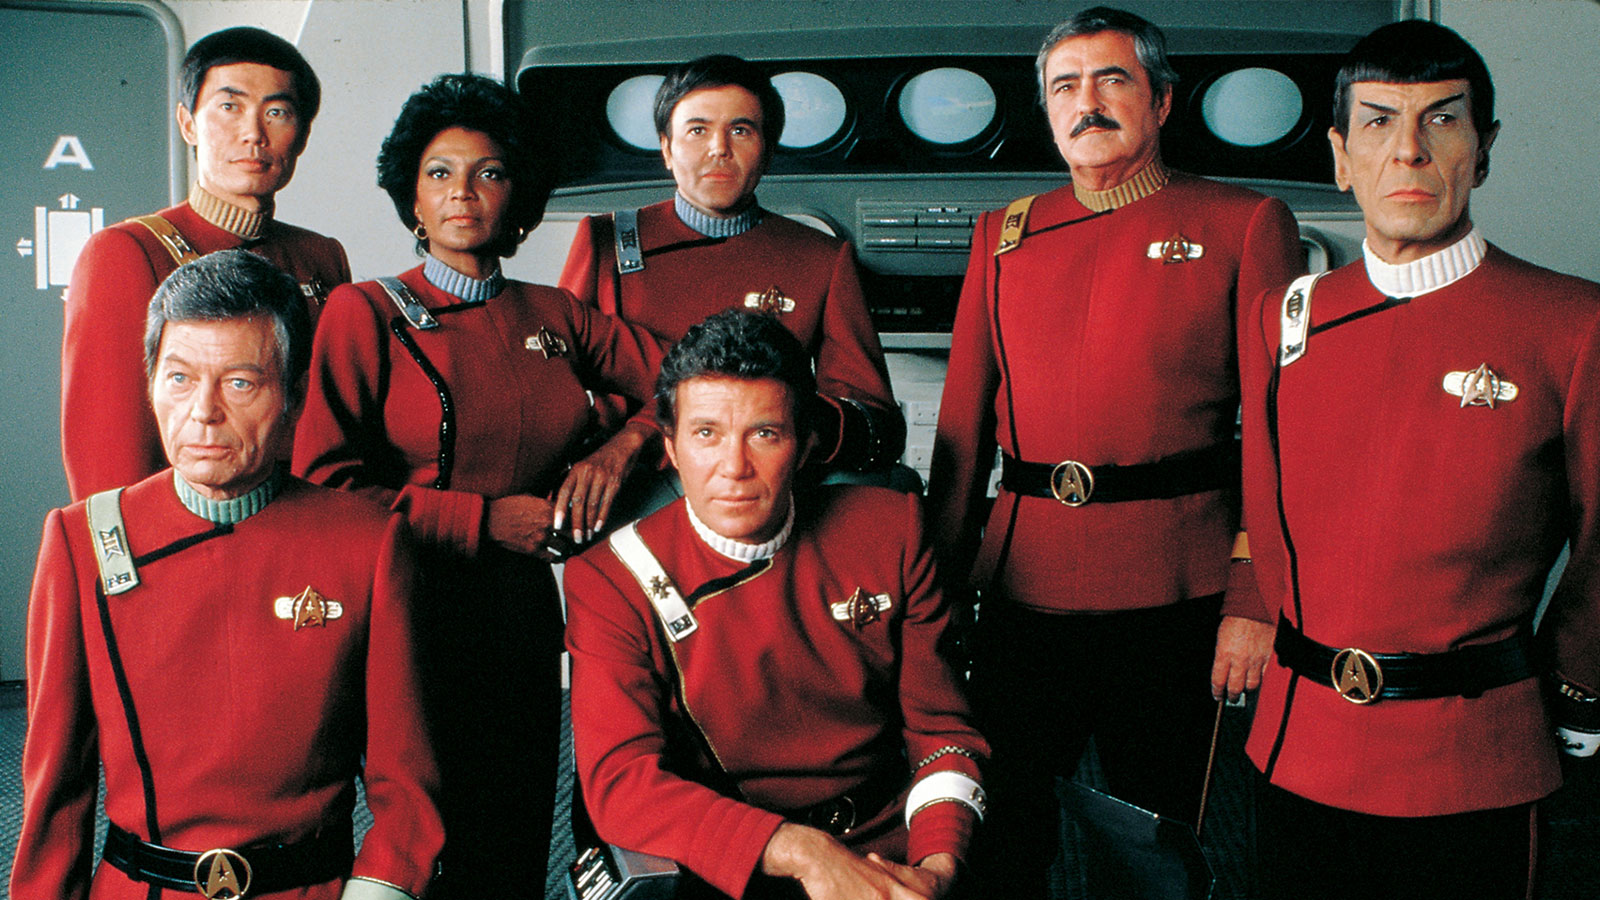 Star Trek II: The Wrath Of Khan Returns To Theaters This Fall To Celebrate 40th Anniversary